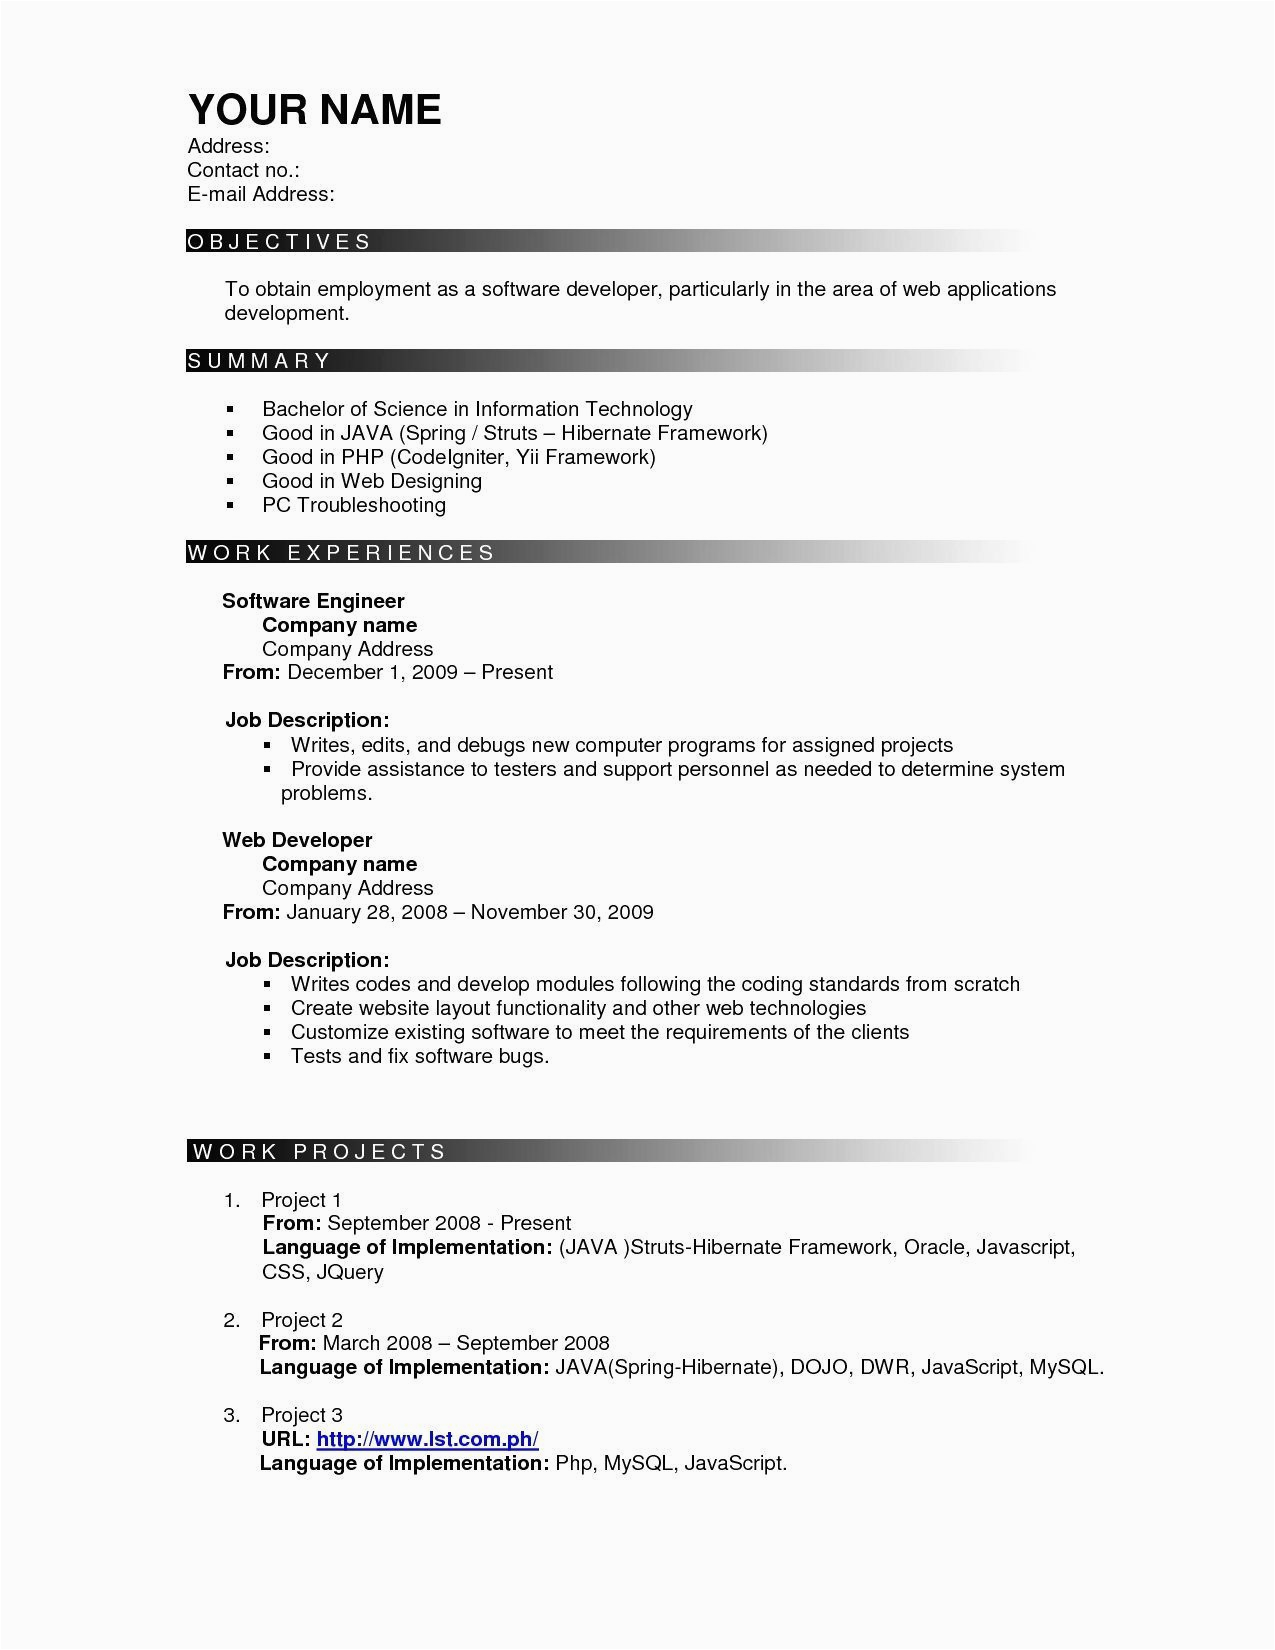 Resume Template for 3 Years Experience Resume format 3 Years Experience Marketing Resume format